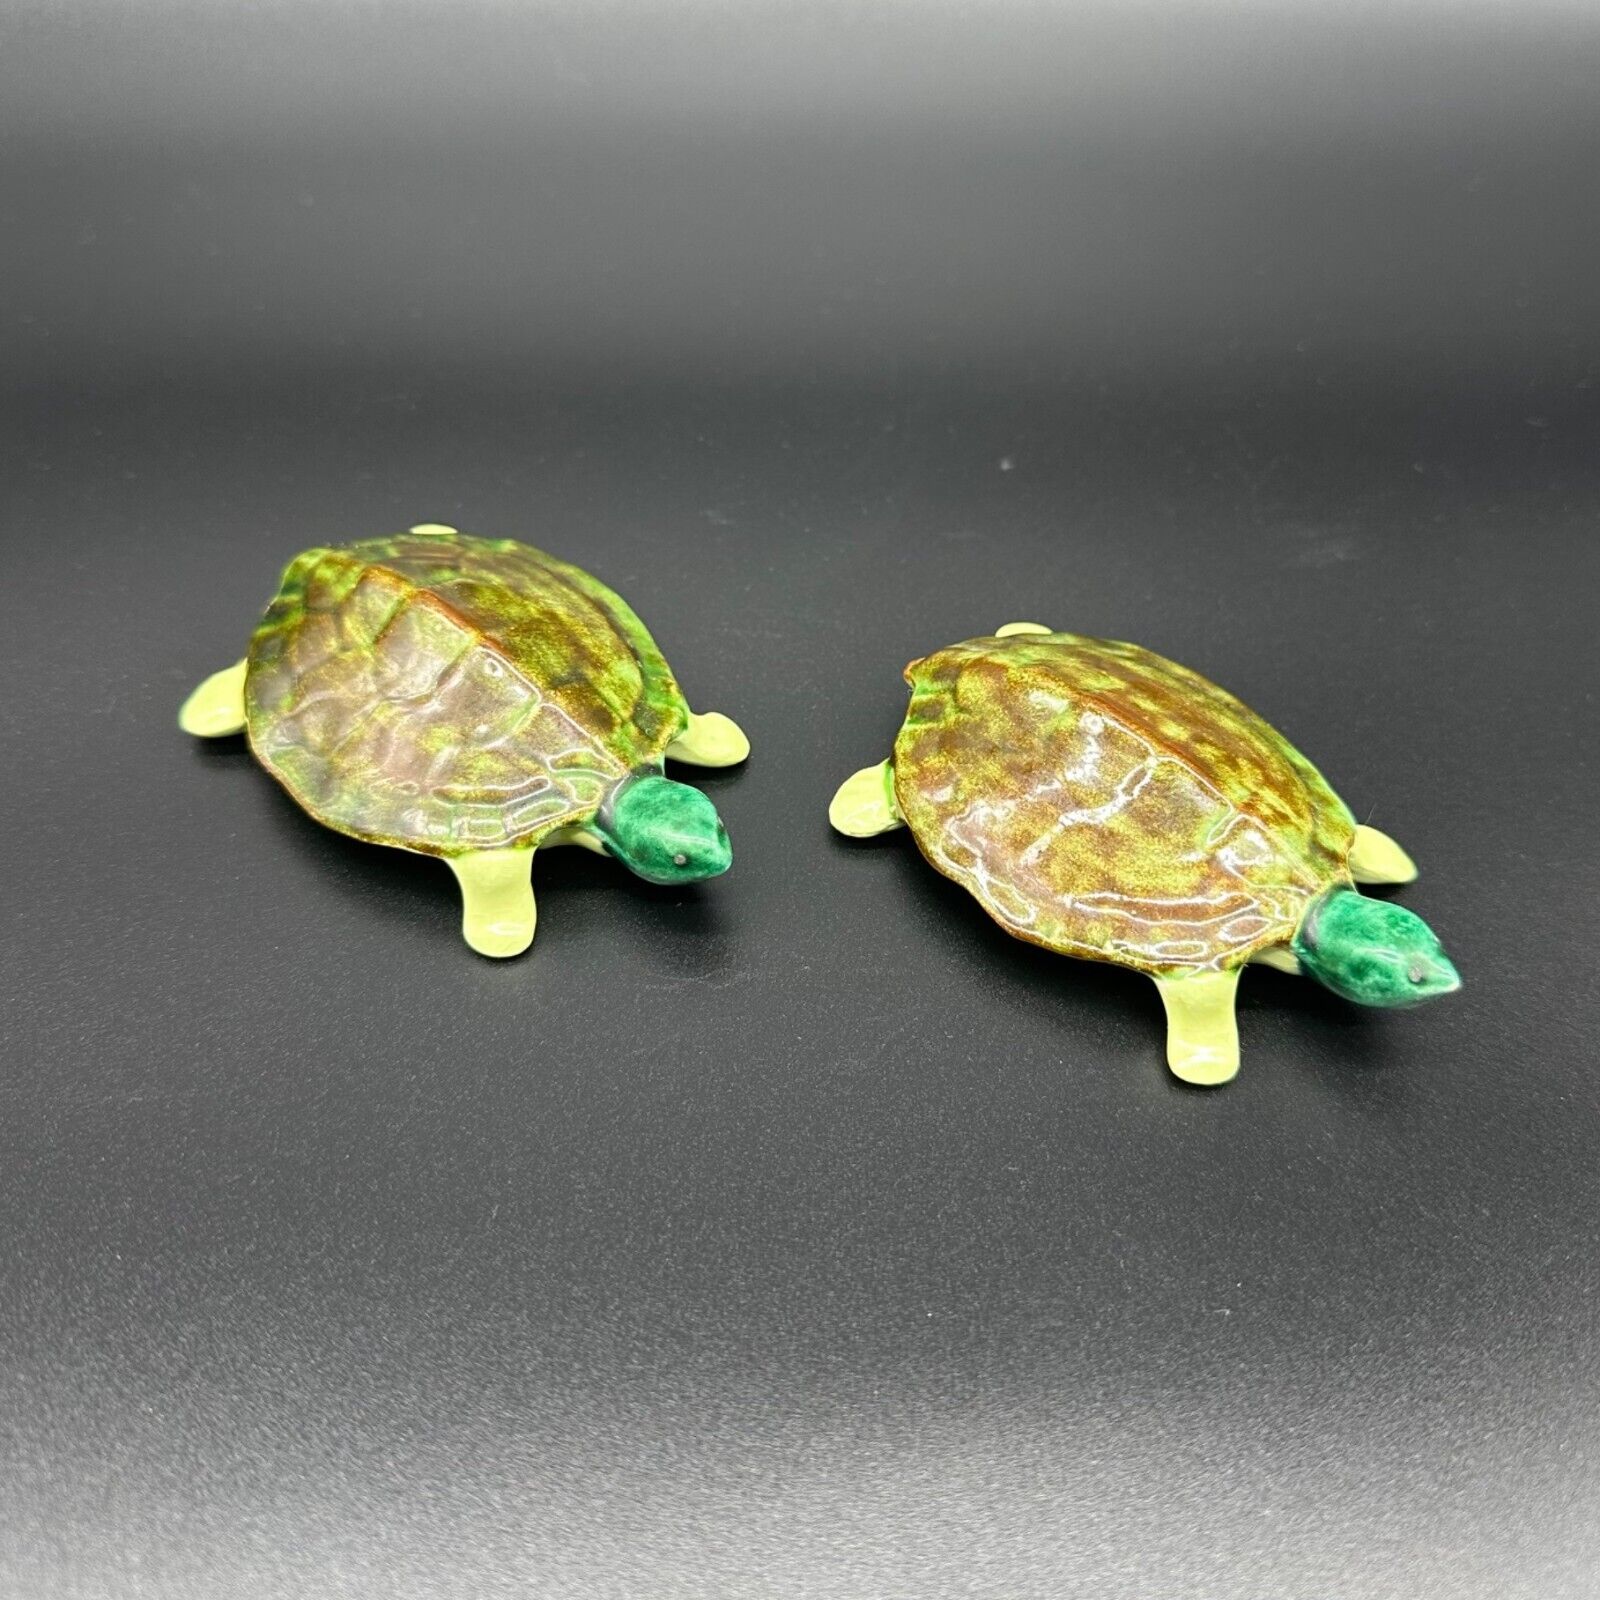 Vintage Naughty Turtle Figurines Kitschy Anatomically Correct Pair Green Humor